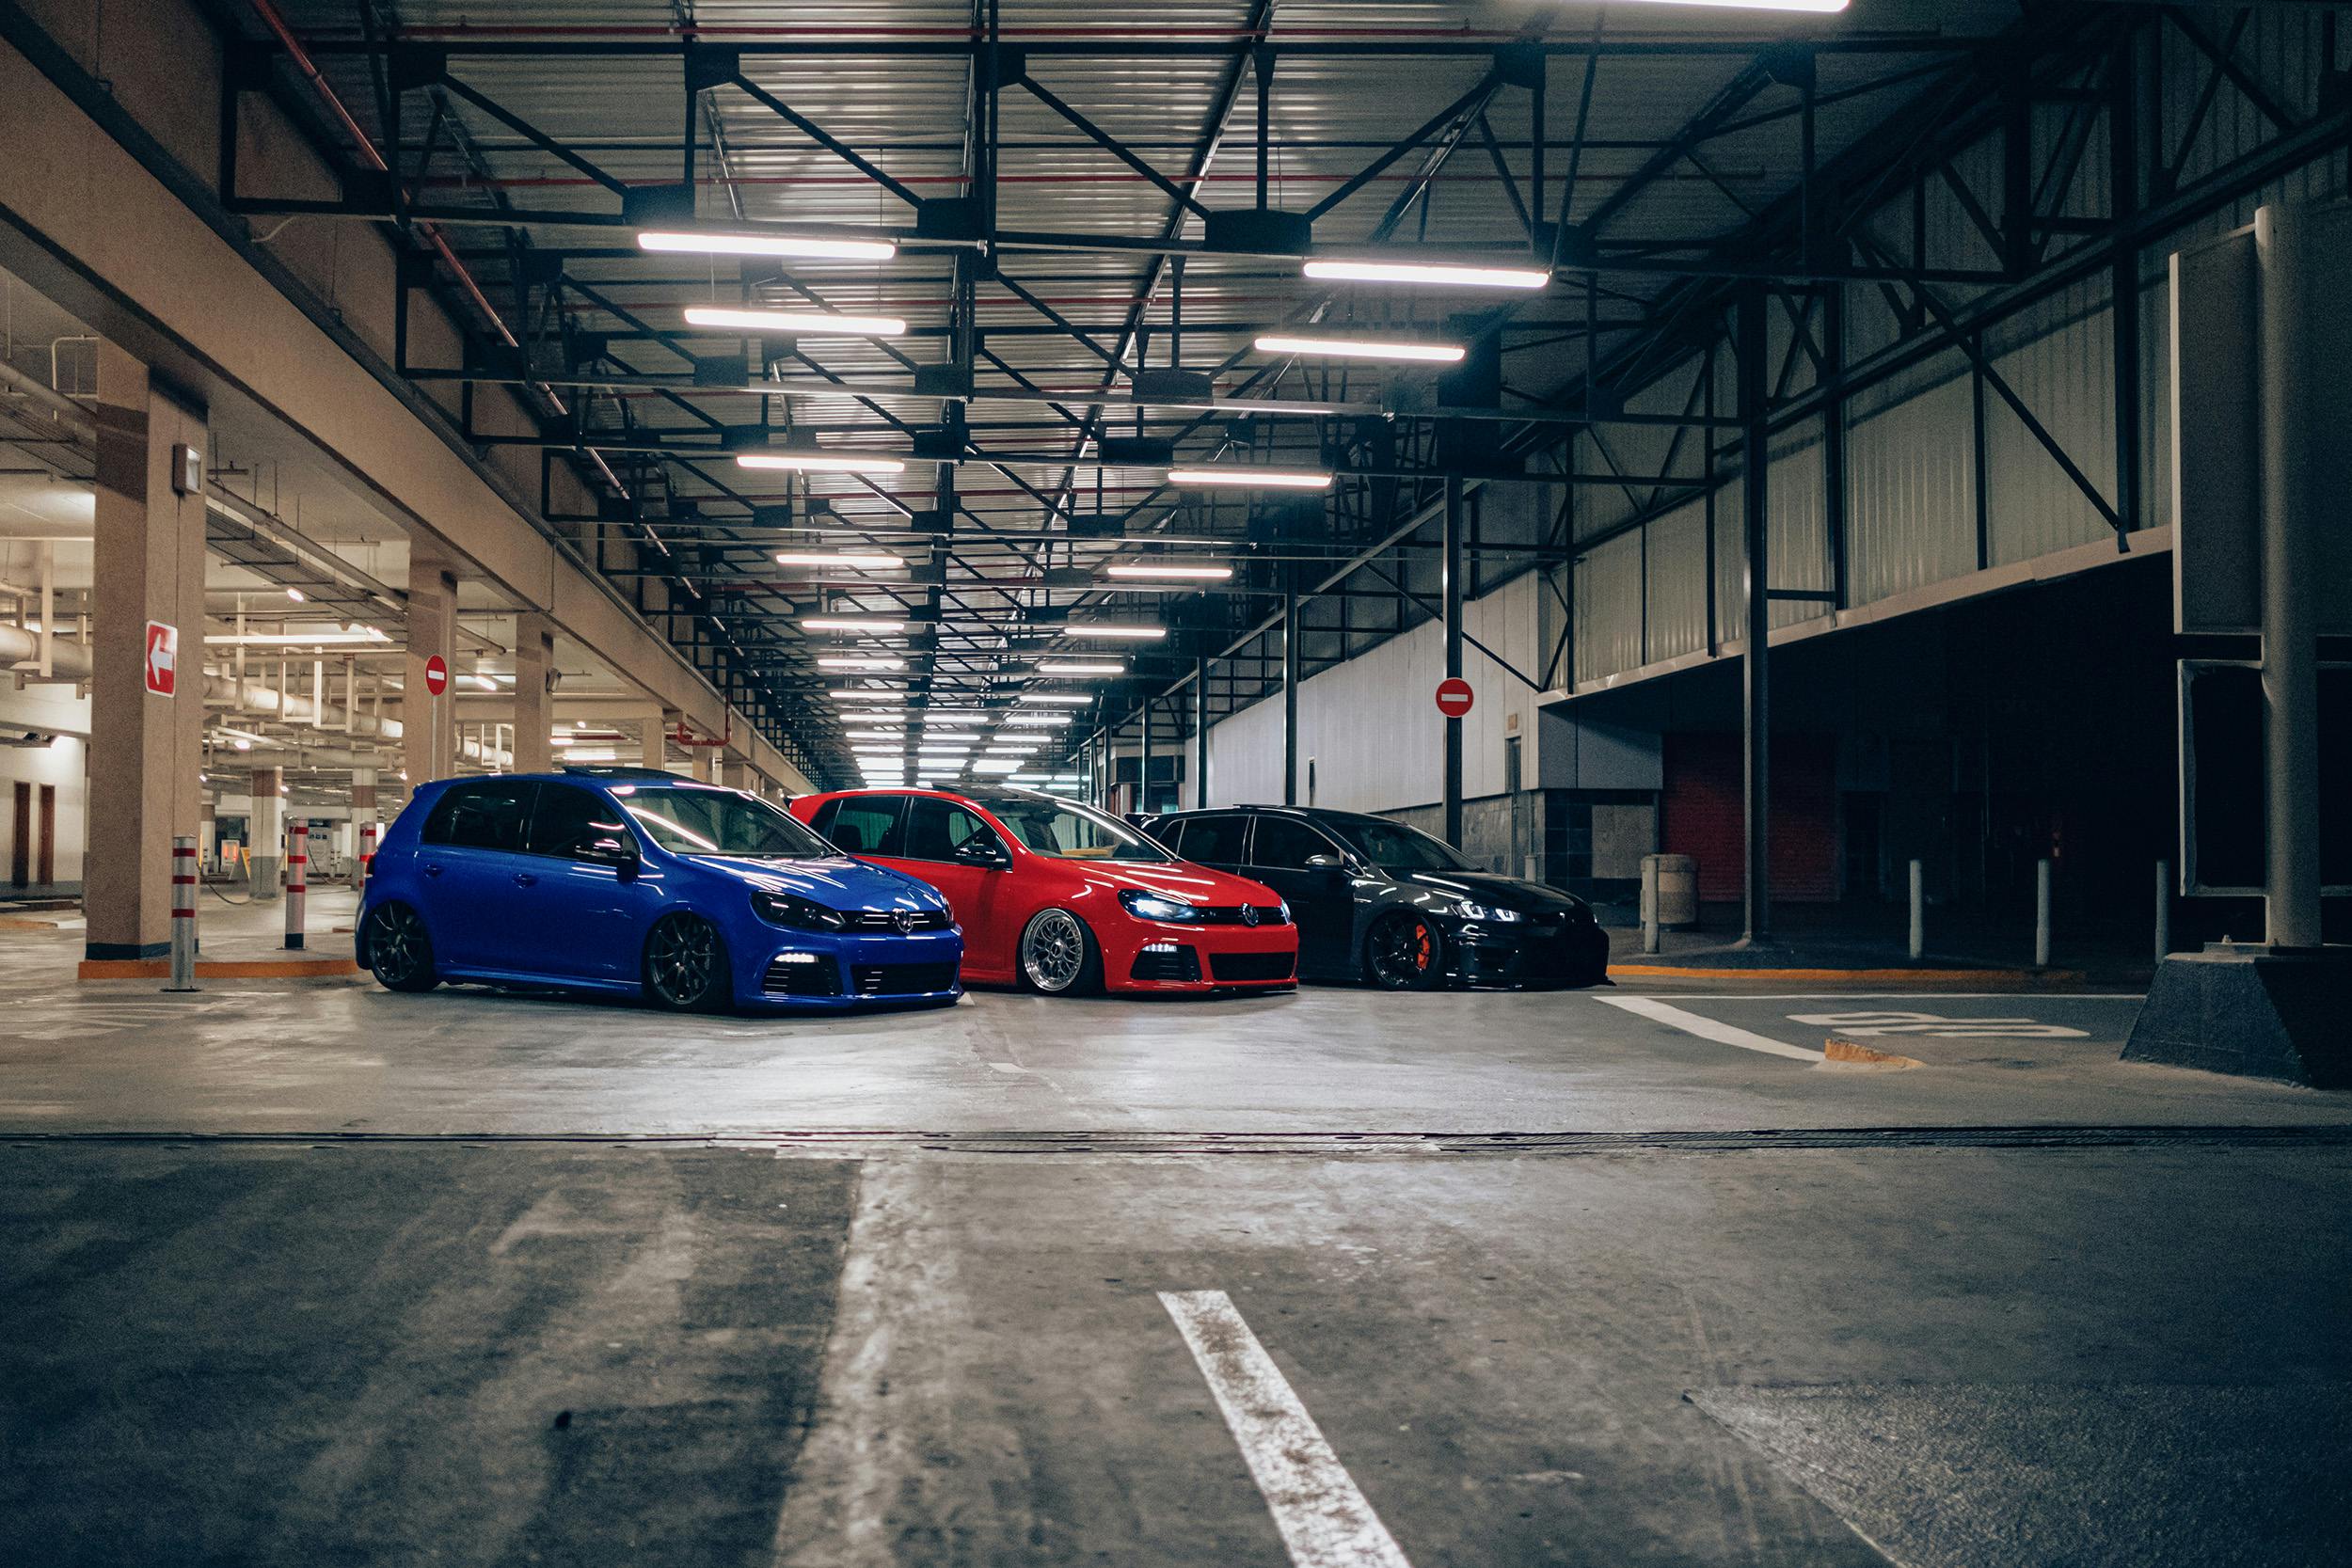 Air Lift Performance Around The World South Africa - VW Golf R trio